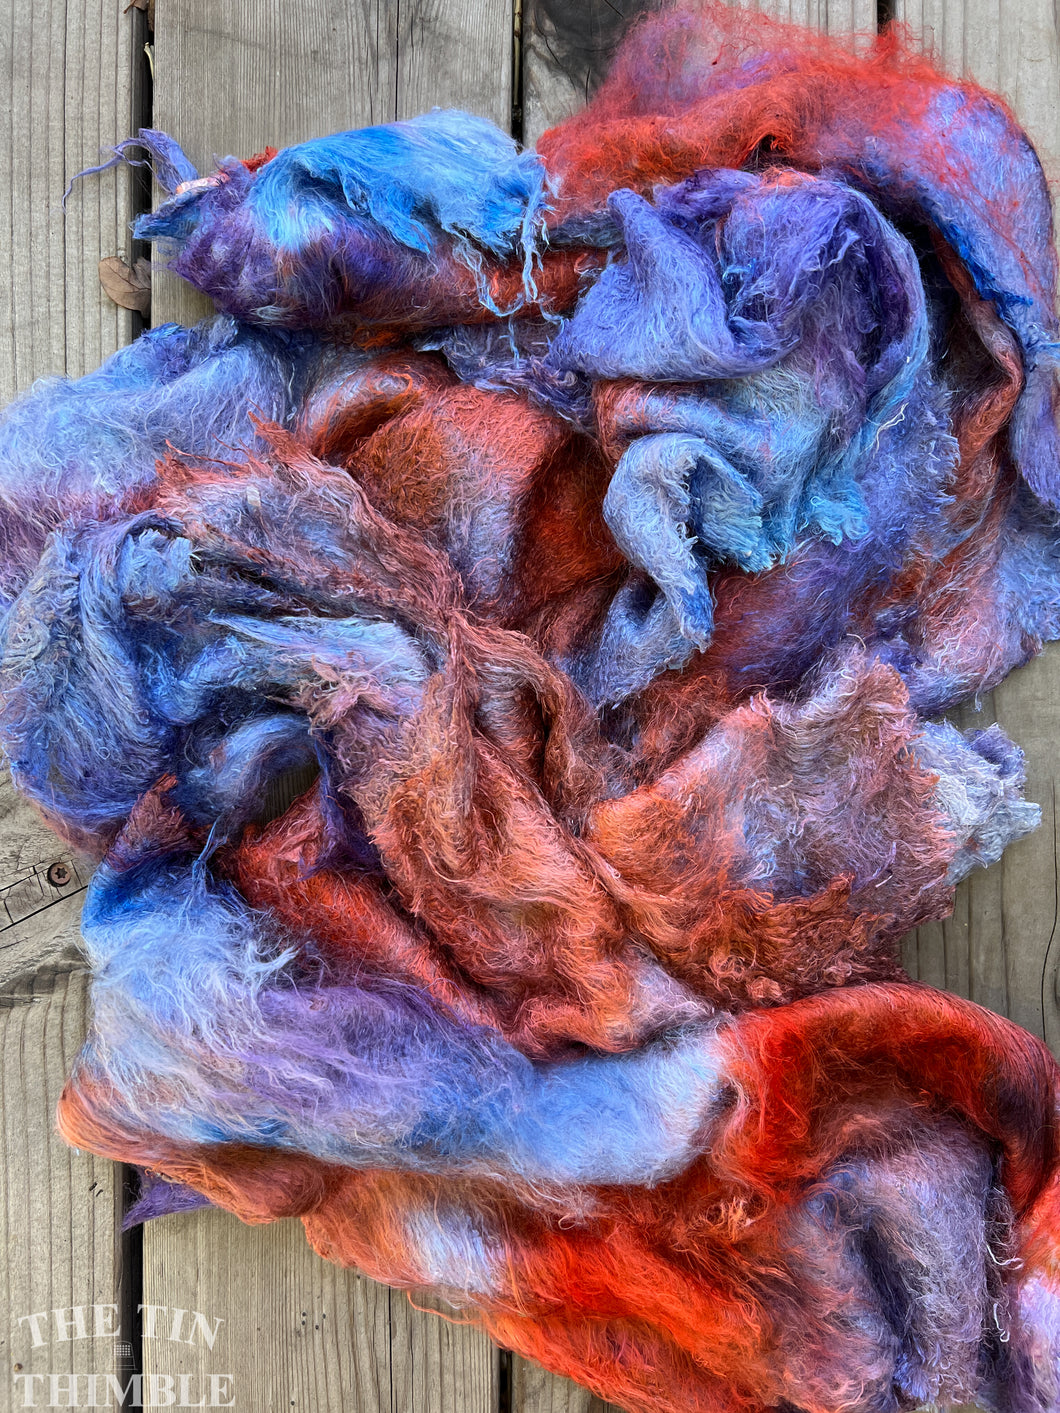 Hand Dyed Silk Mulberry Lap Fiber for Spinning or Felting in Sunrise / Blue, Purple & Pink 100% Silk Laps Similar to Silk Hankies